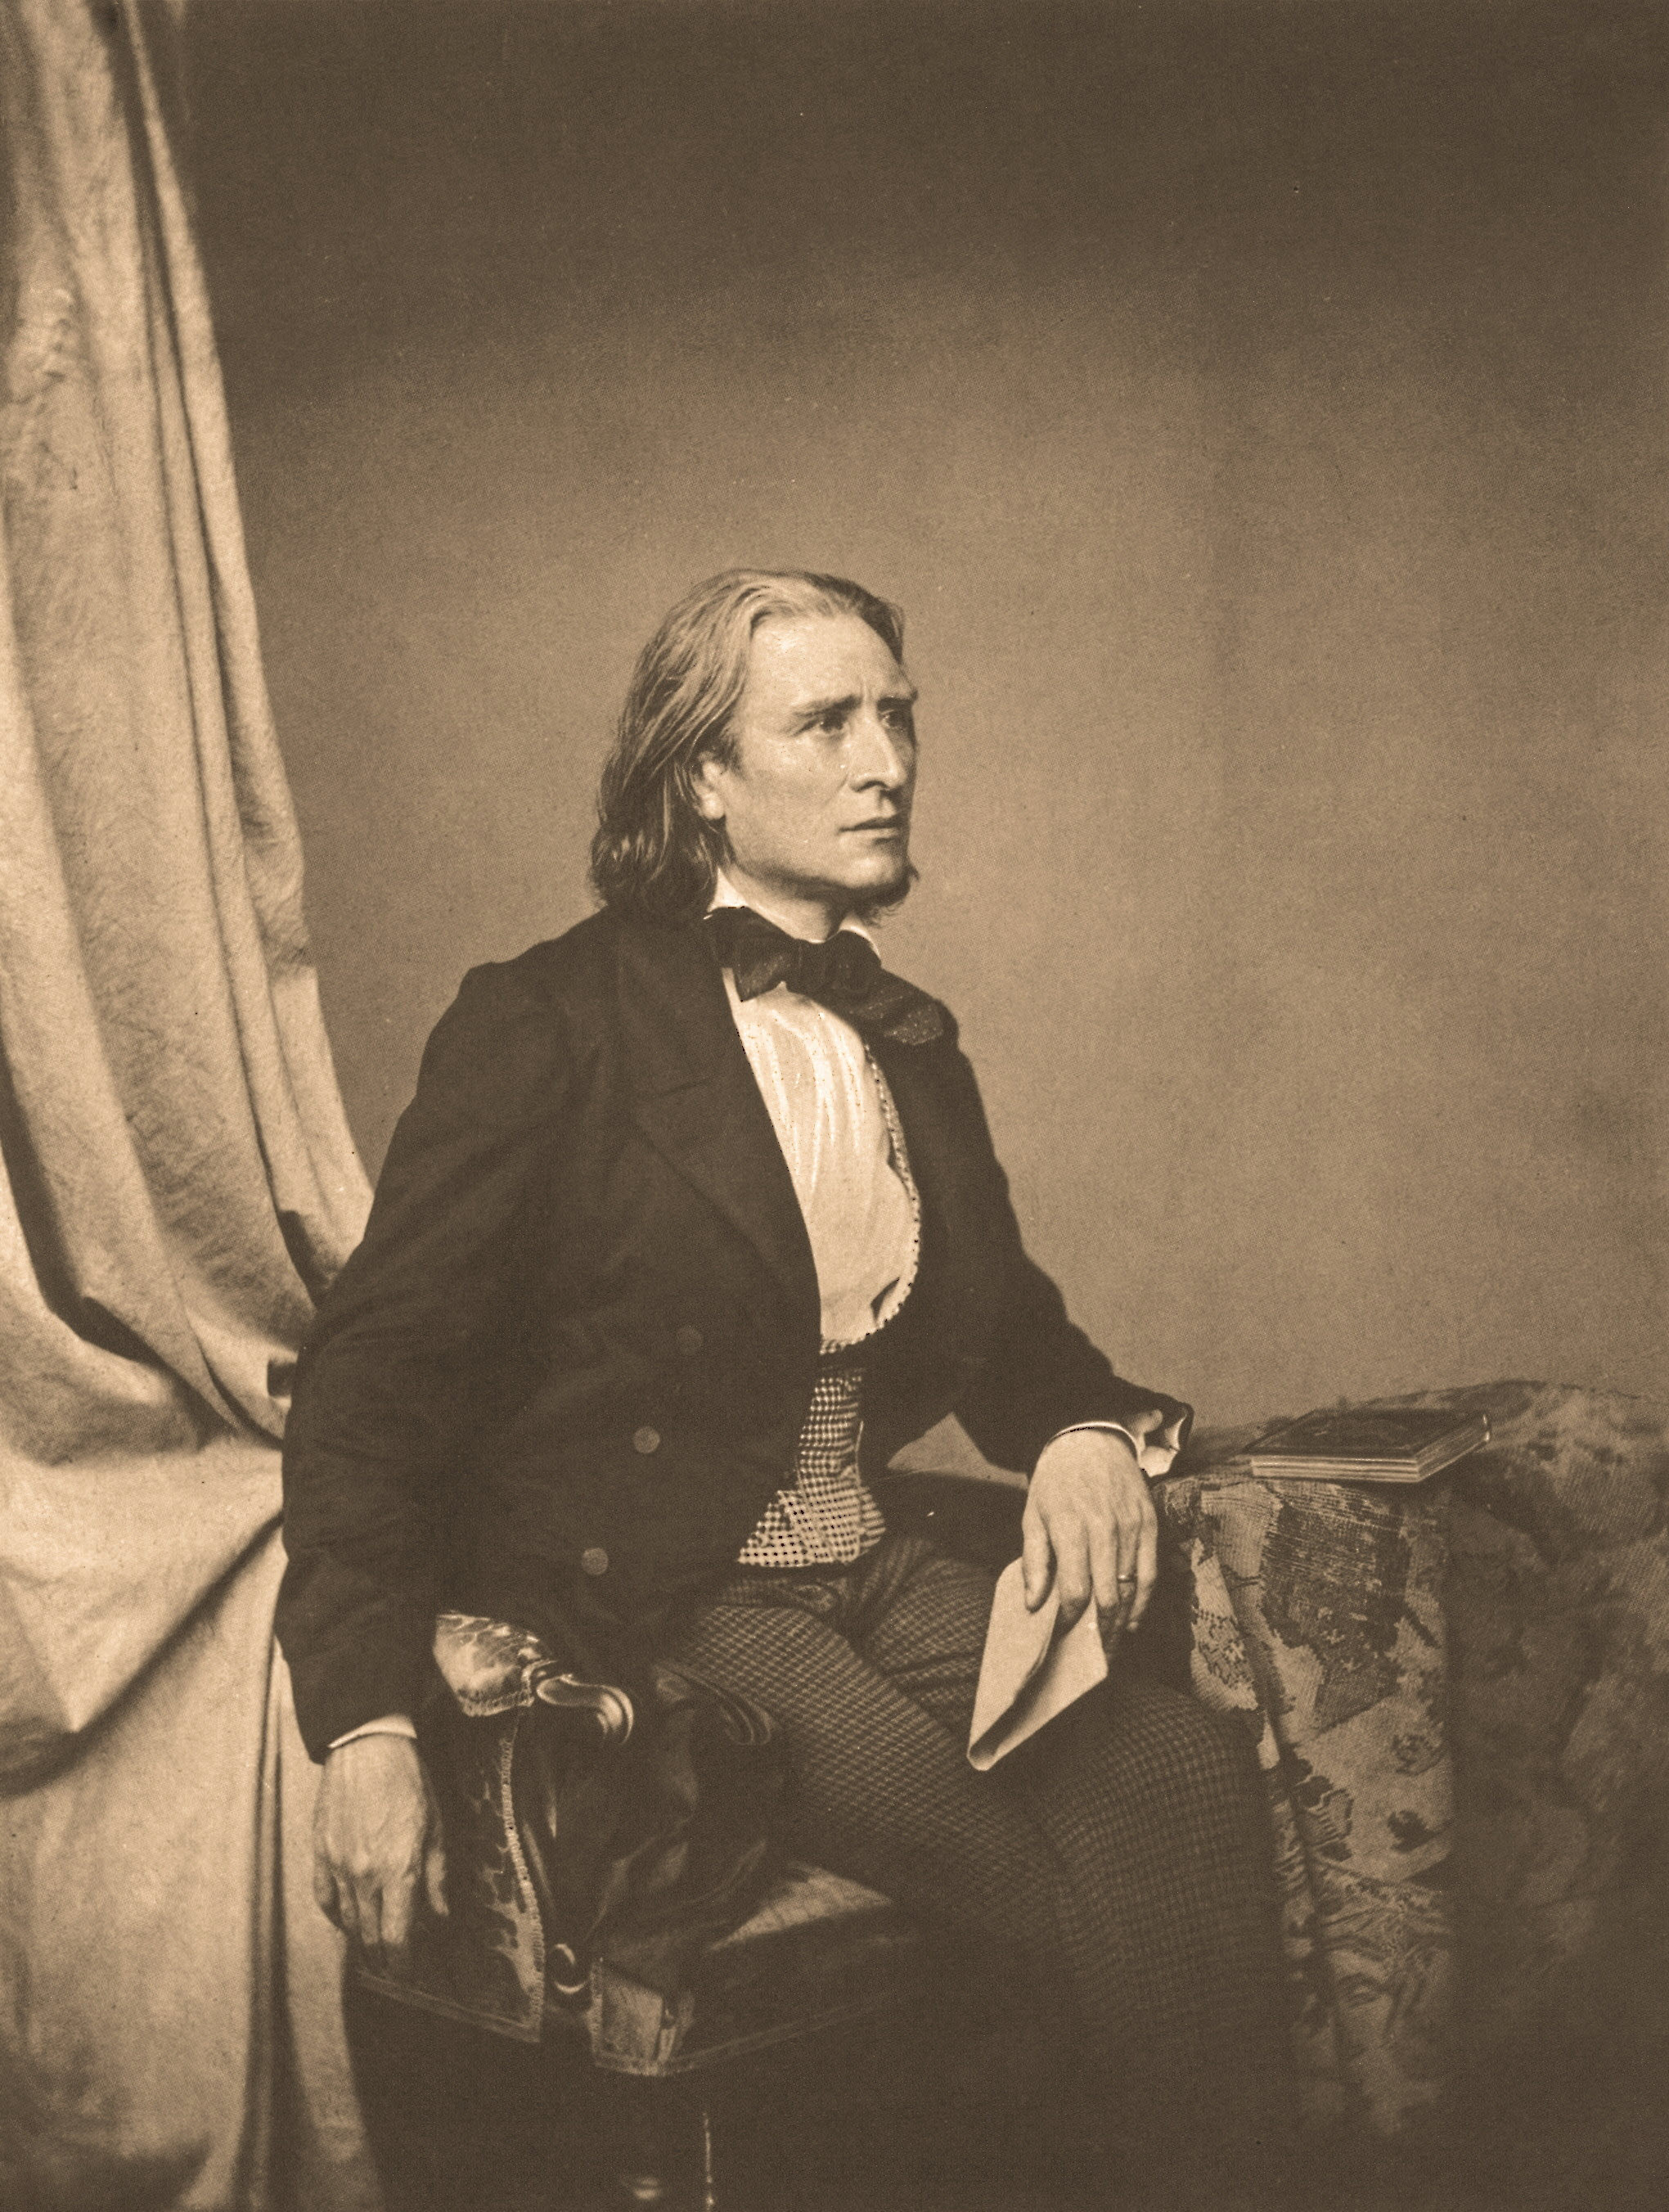 in the 1800s, pianist and composer, Franz Liszt, was worshiped like a rock star in what was dubbed Lisztomania 1858.jpg